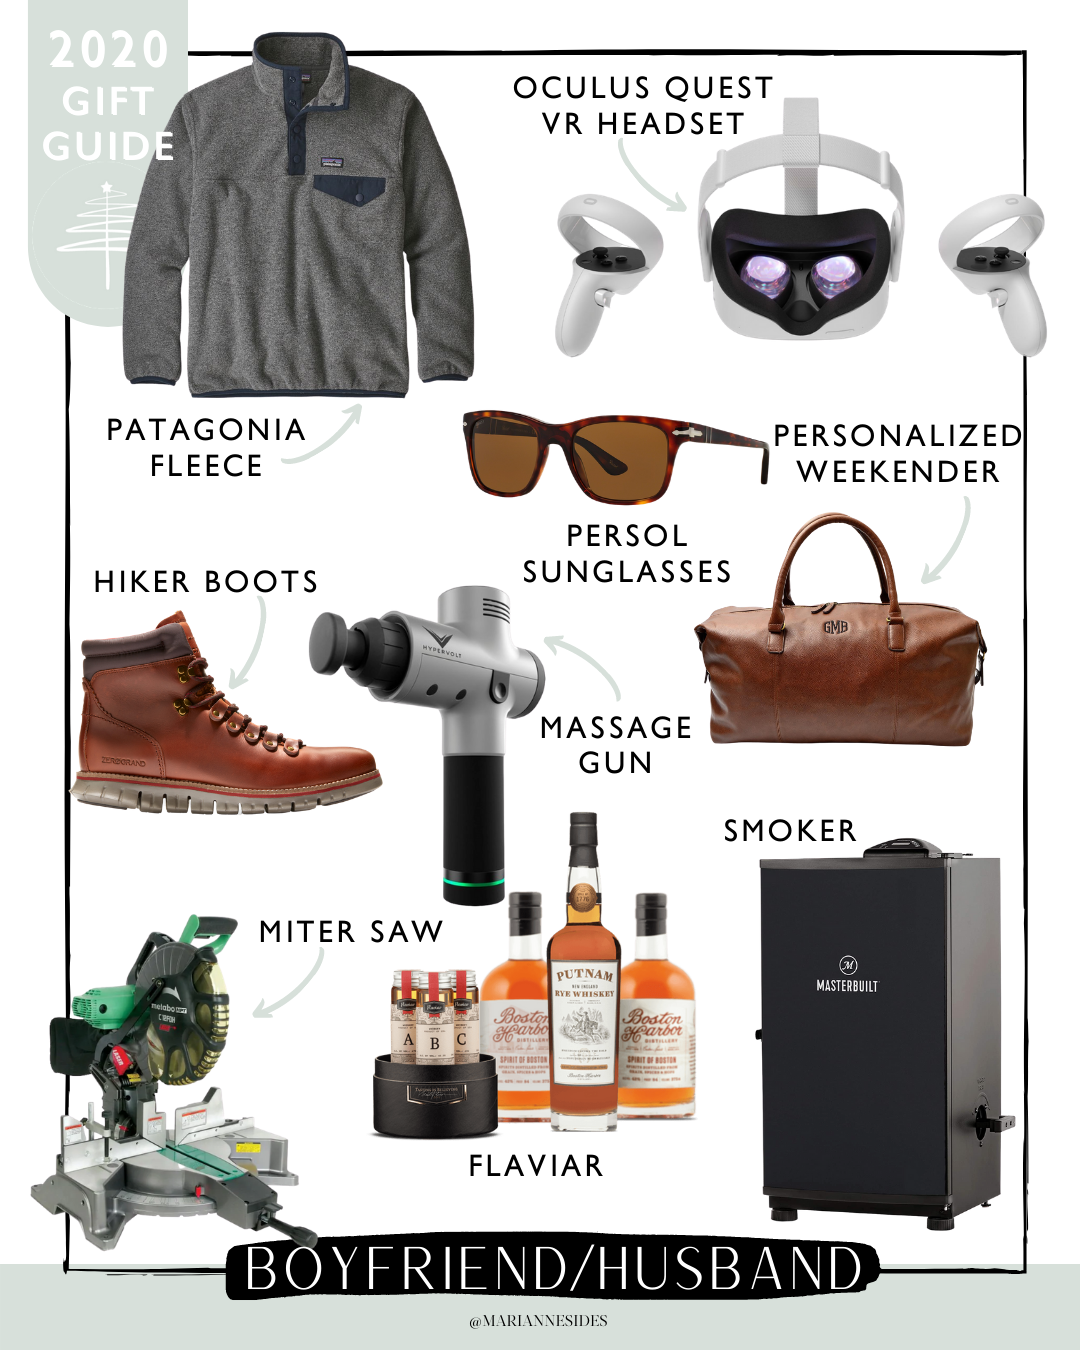 2020 Gift Guide: For Him (Husband/Boyfriend) - THE M.A. TIMES